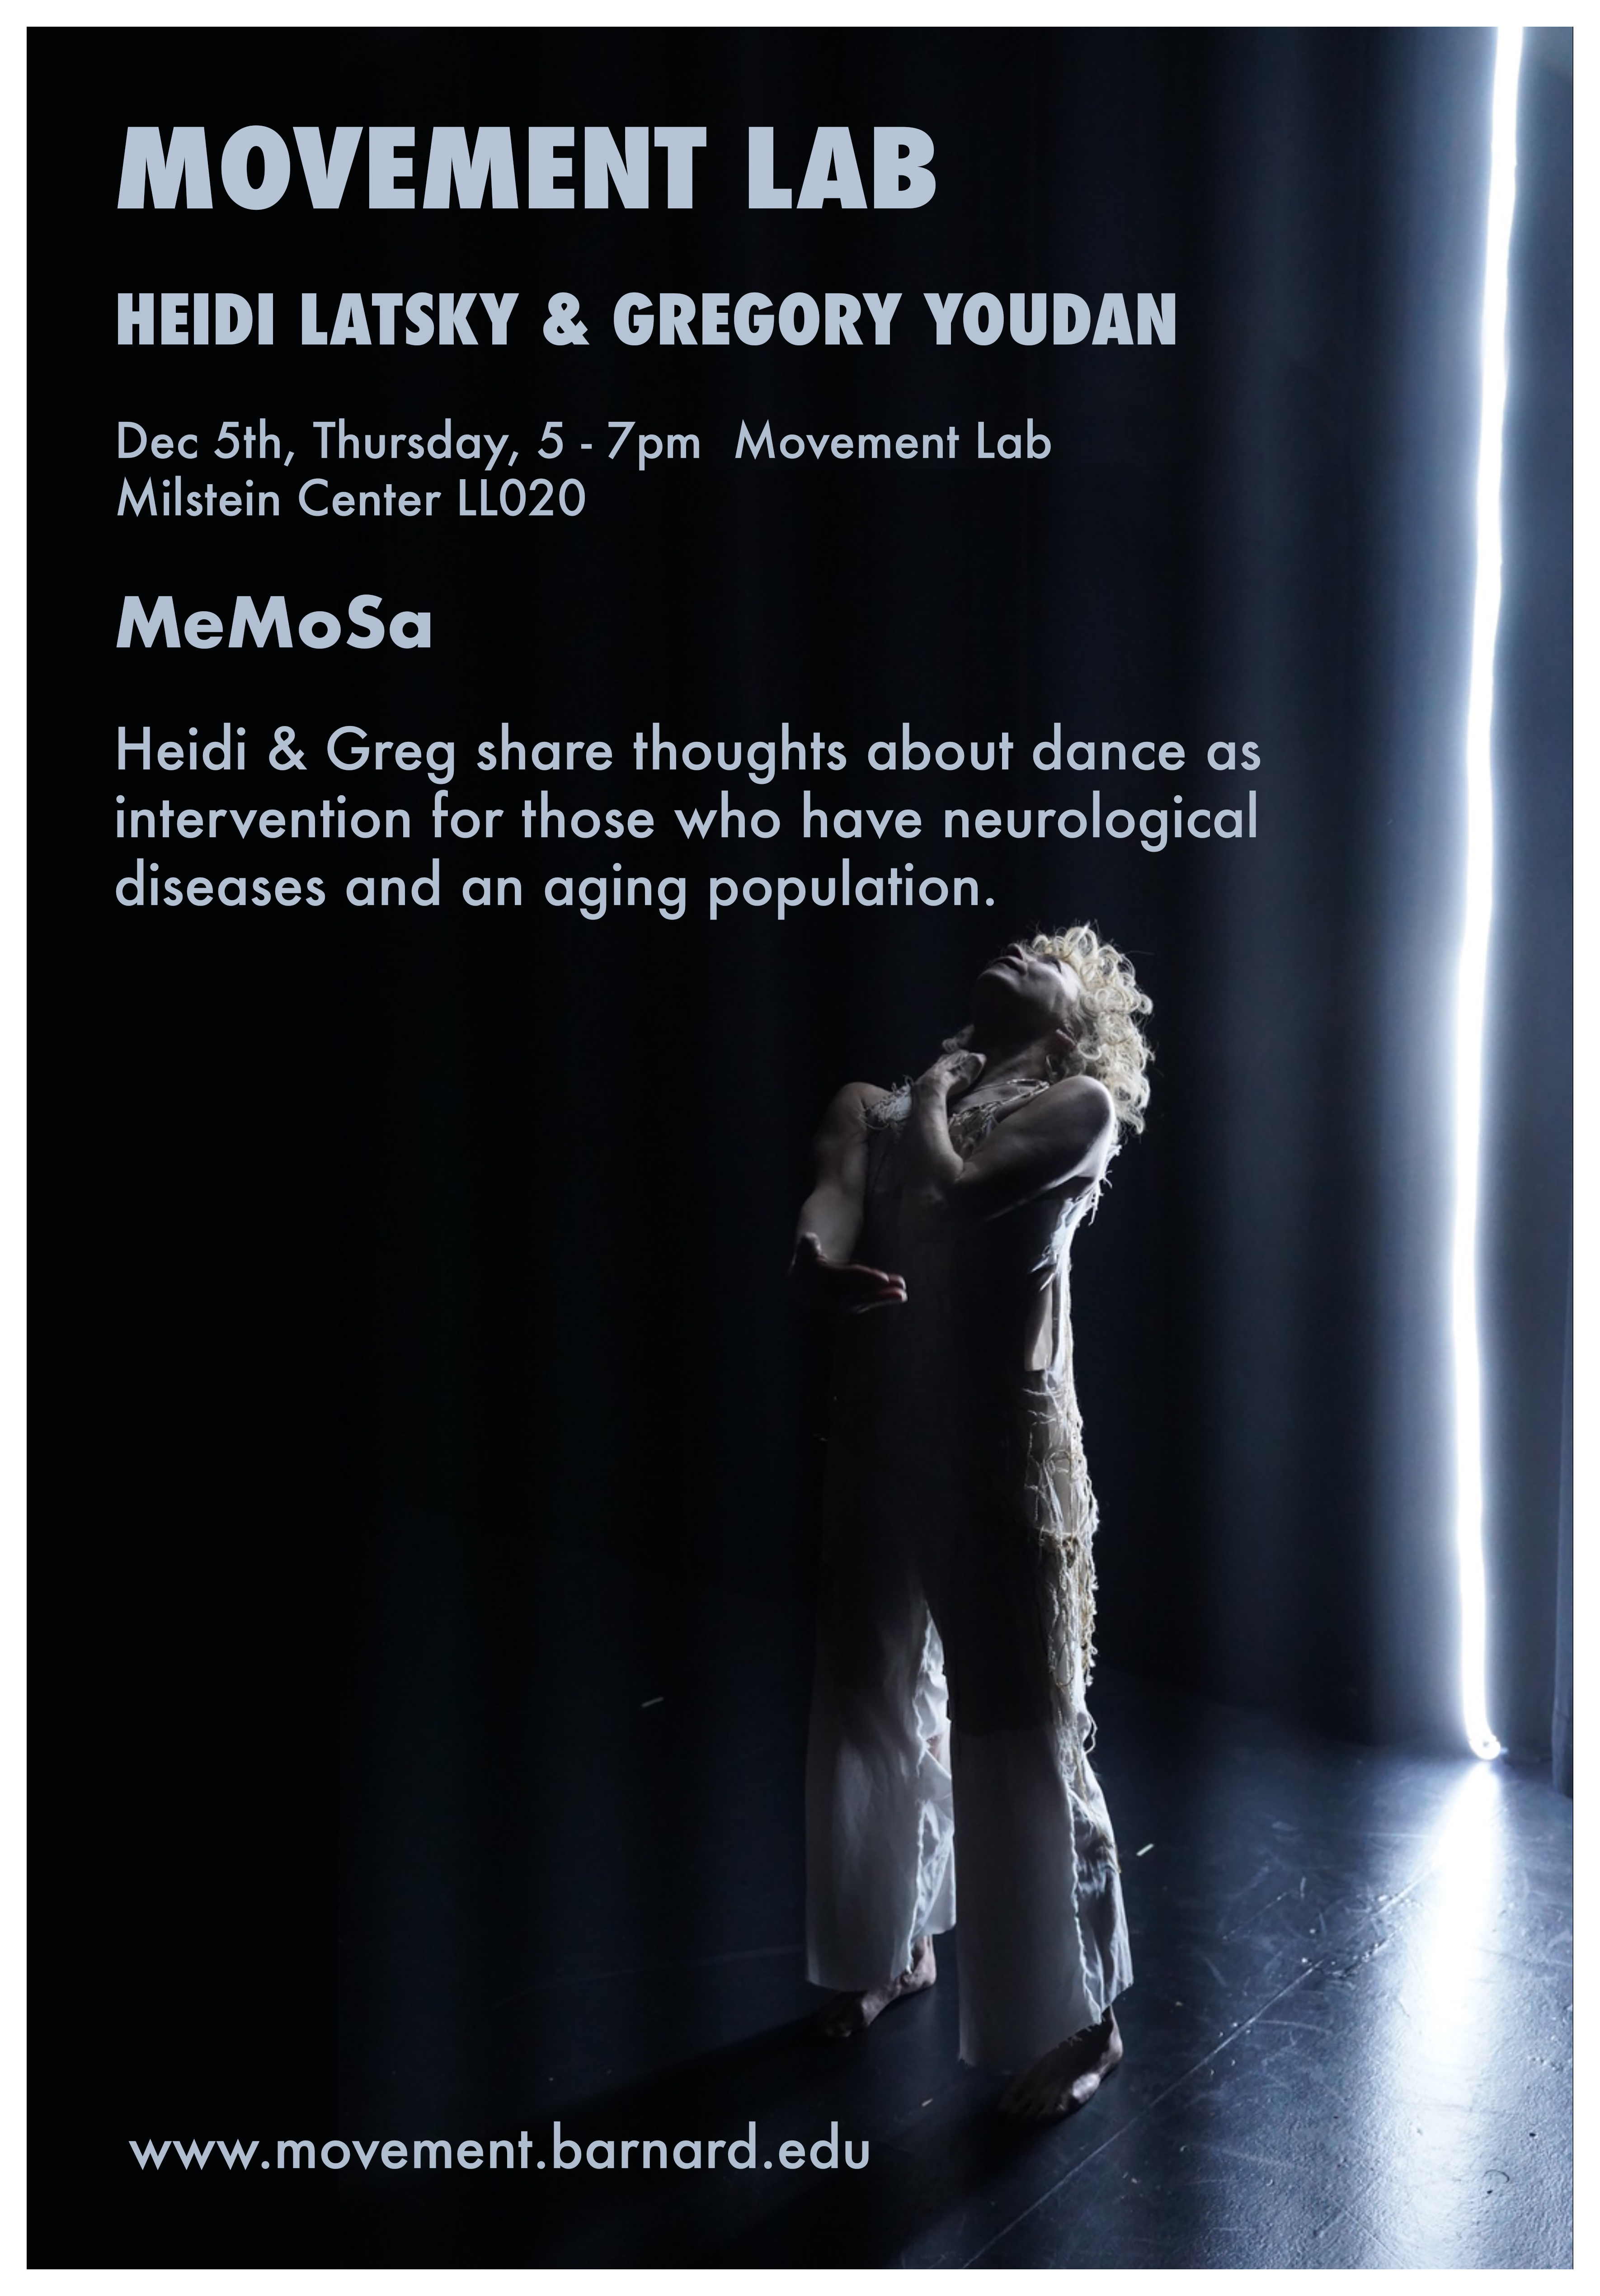 Workshop poster that reads "Heidi Latsky & Gregory Youdan. December 5th, Thursday, 5-7pm. Movement Lab, Milstein Center LL020. Heidi and Greg share thoughts about dance as intervention for those who have neurological diseases and an aging population."